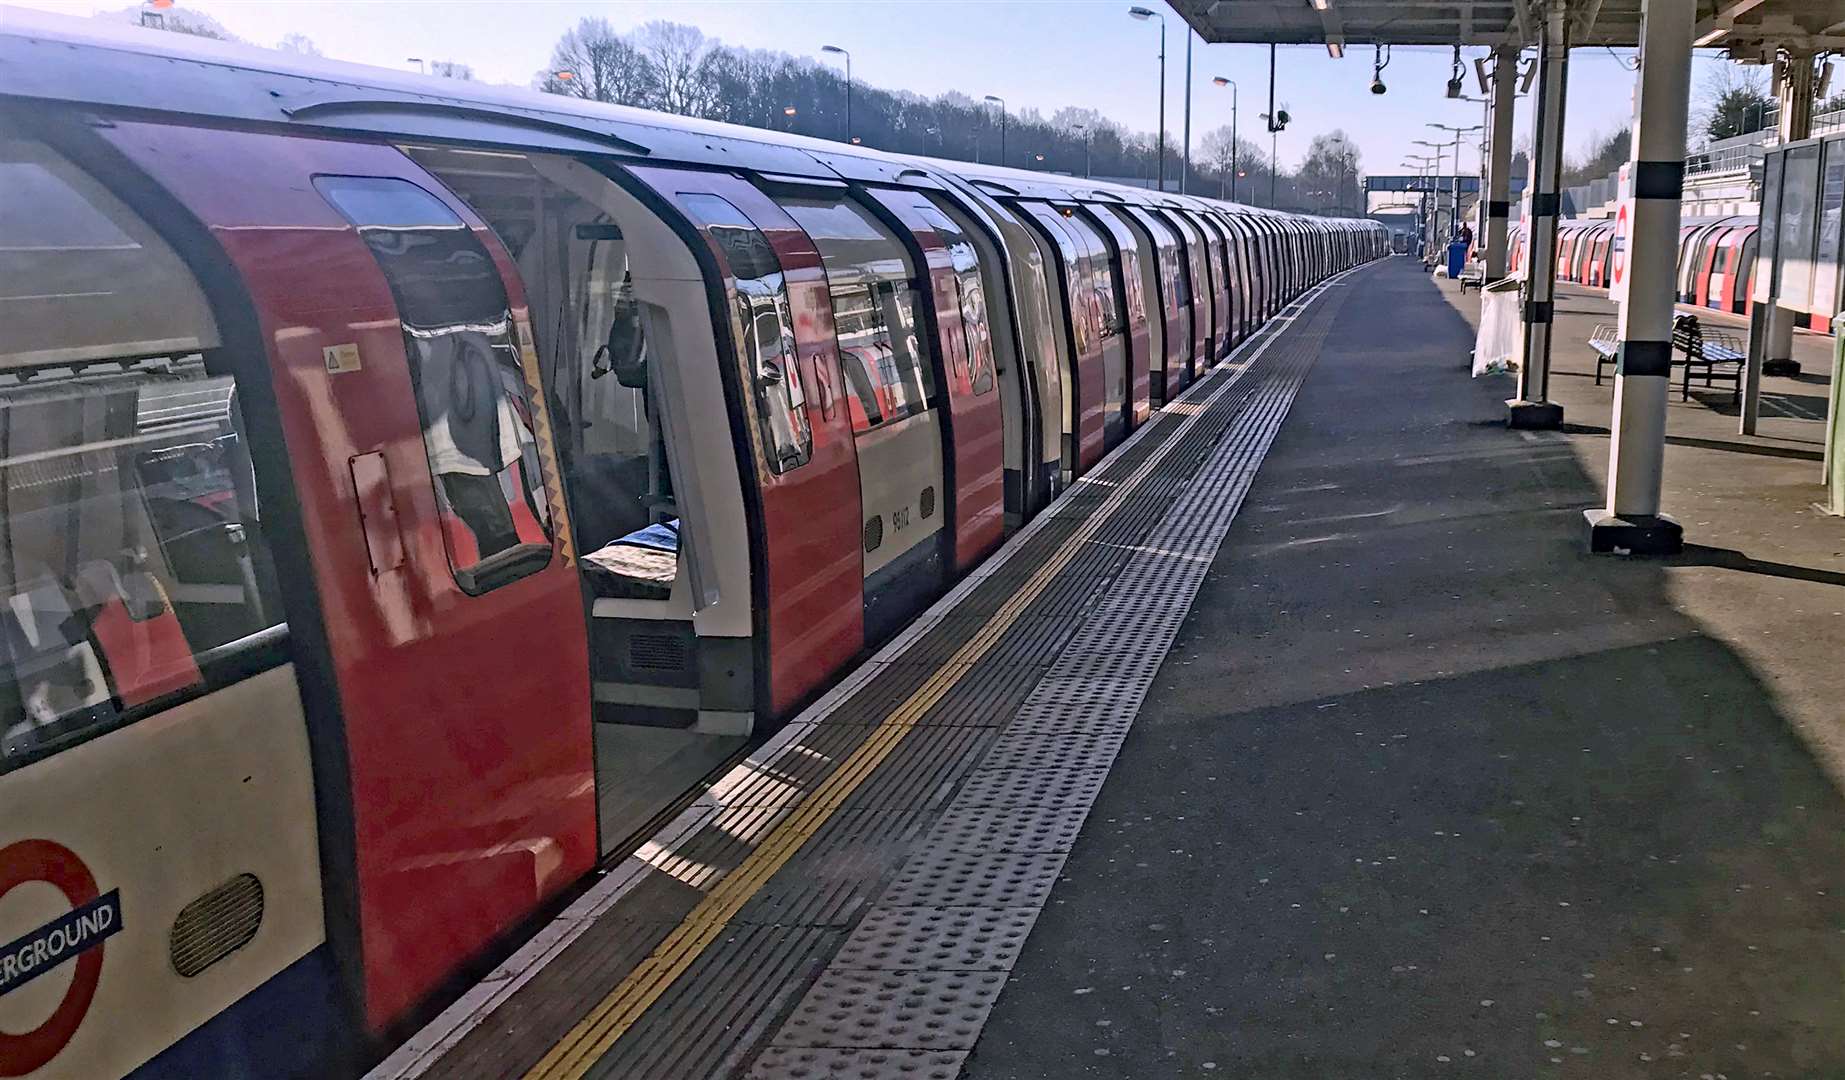 An economic think tank has suggested increasing peak-time ticket prices on London’s Tube could help manage passenger numbers